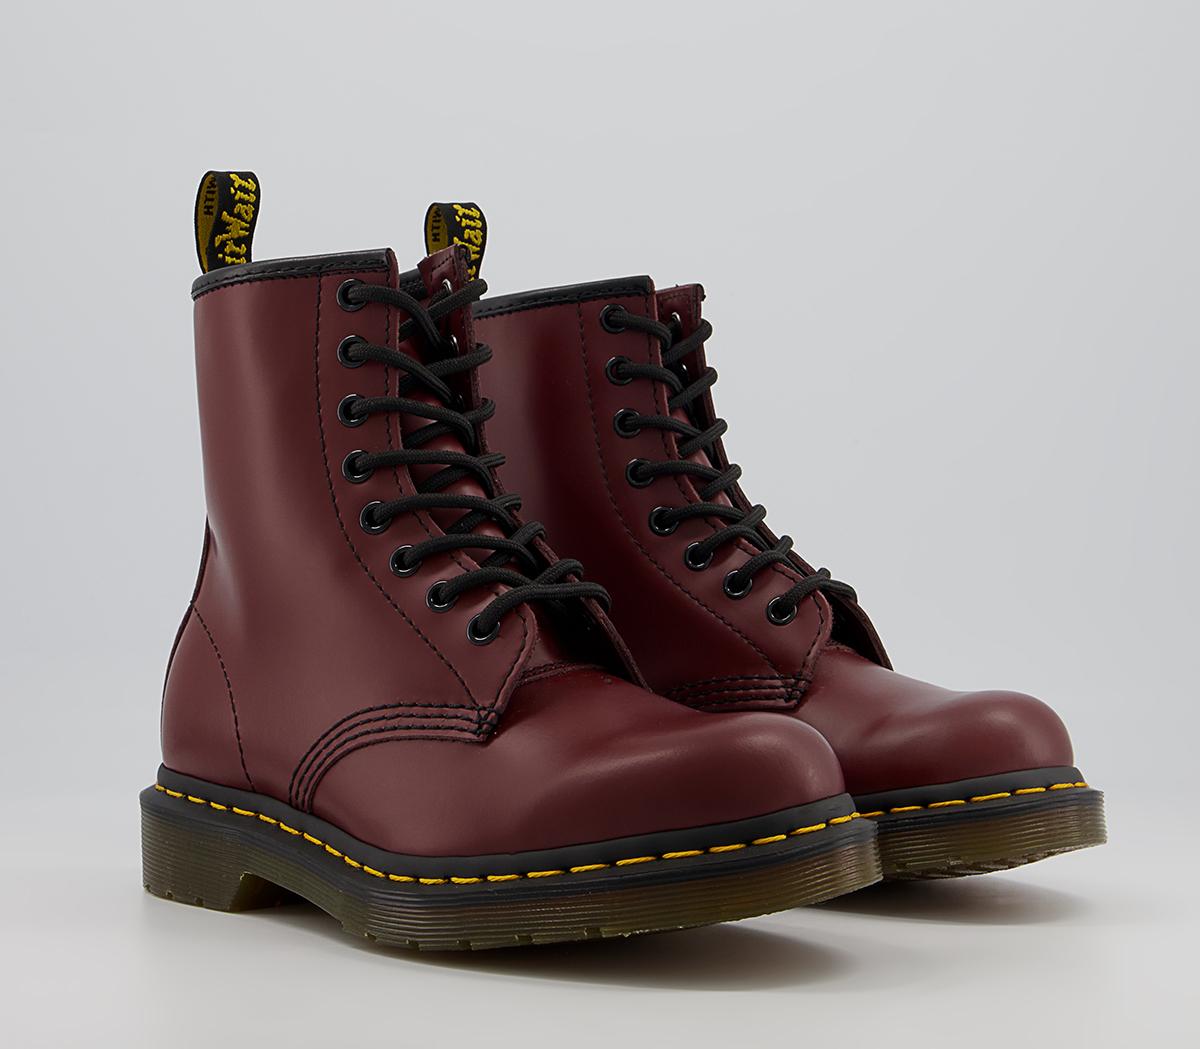 Dr. Martens 8 Eyelet Lace Up Boots Cherry Red - Ankle Boots